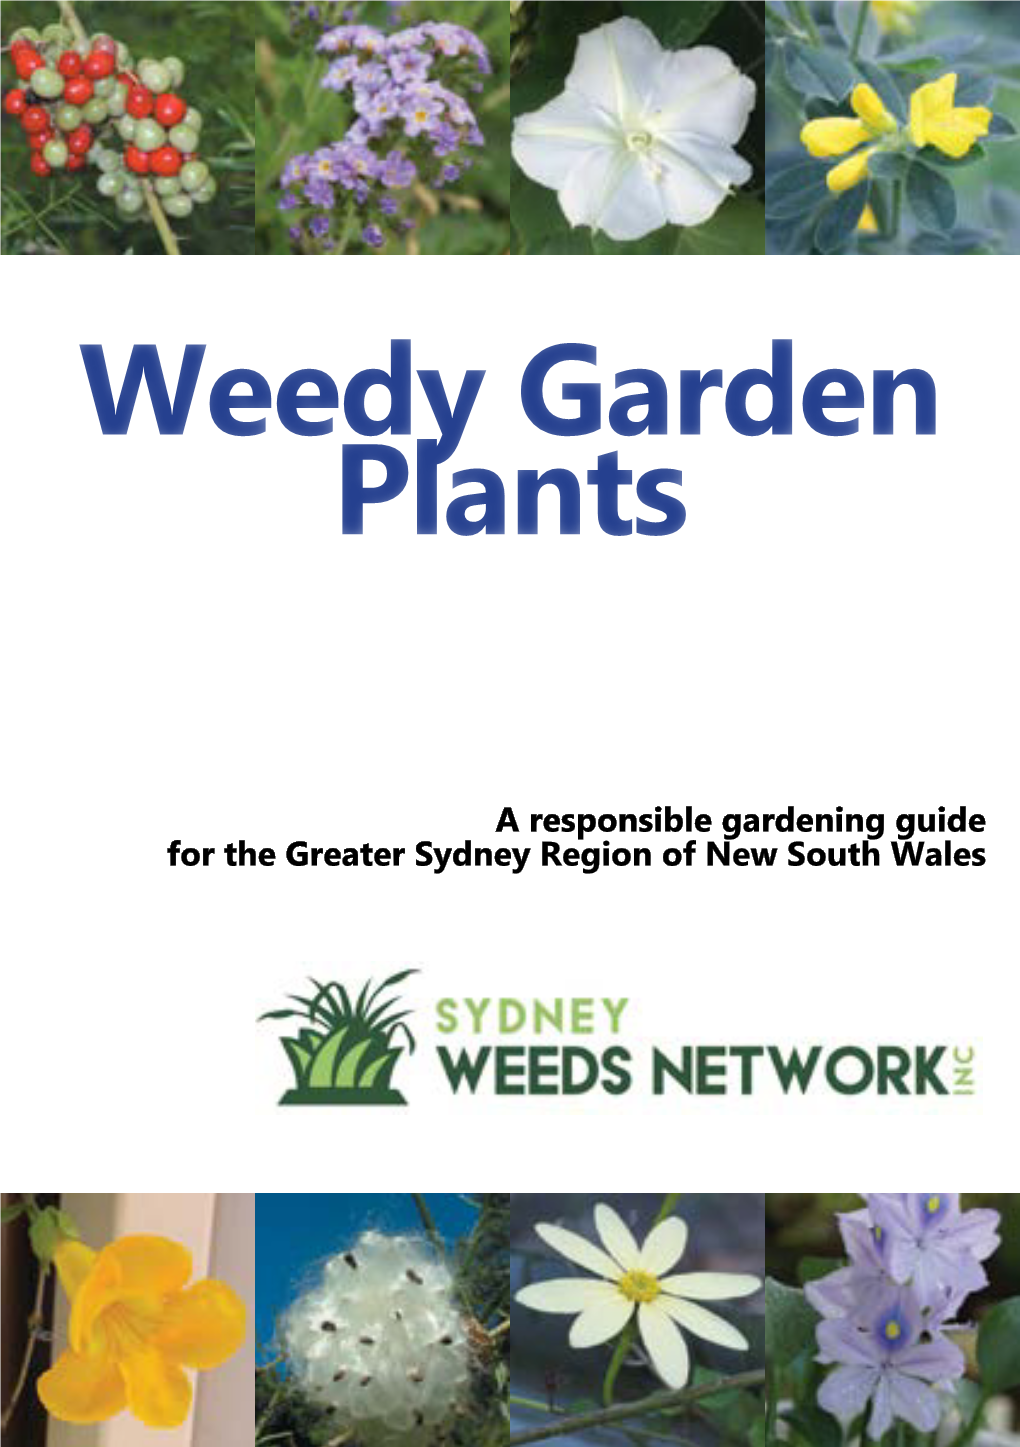 Weedy Garden Plants Acknowledgements the Board of the Sydney Weeds Network Inc